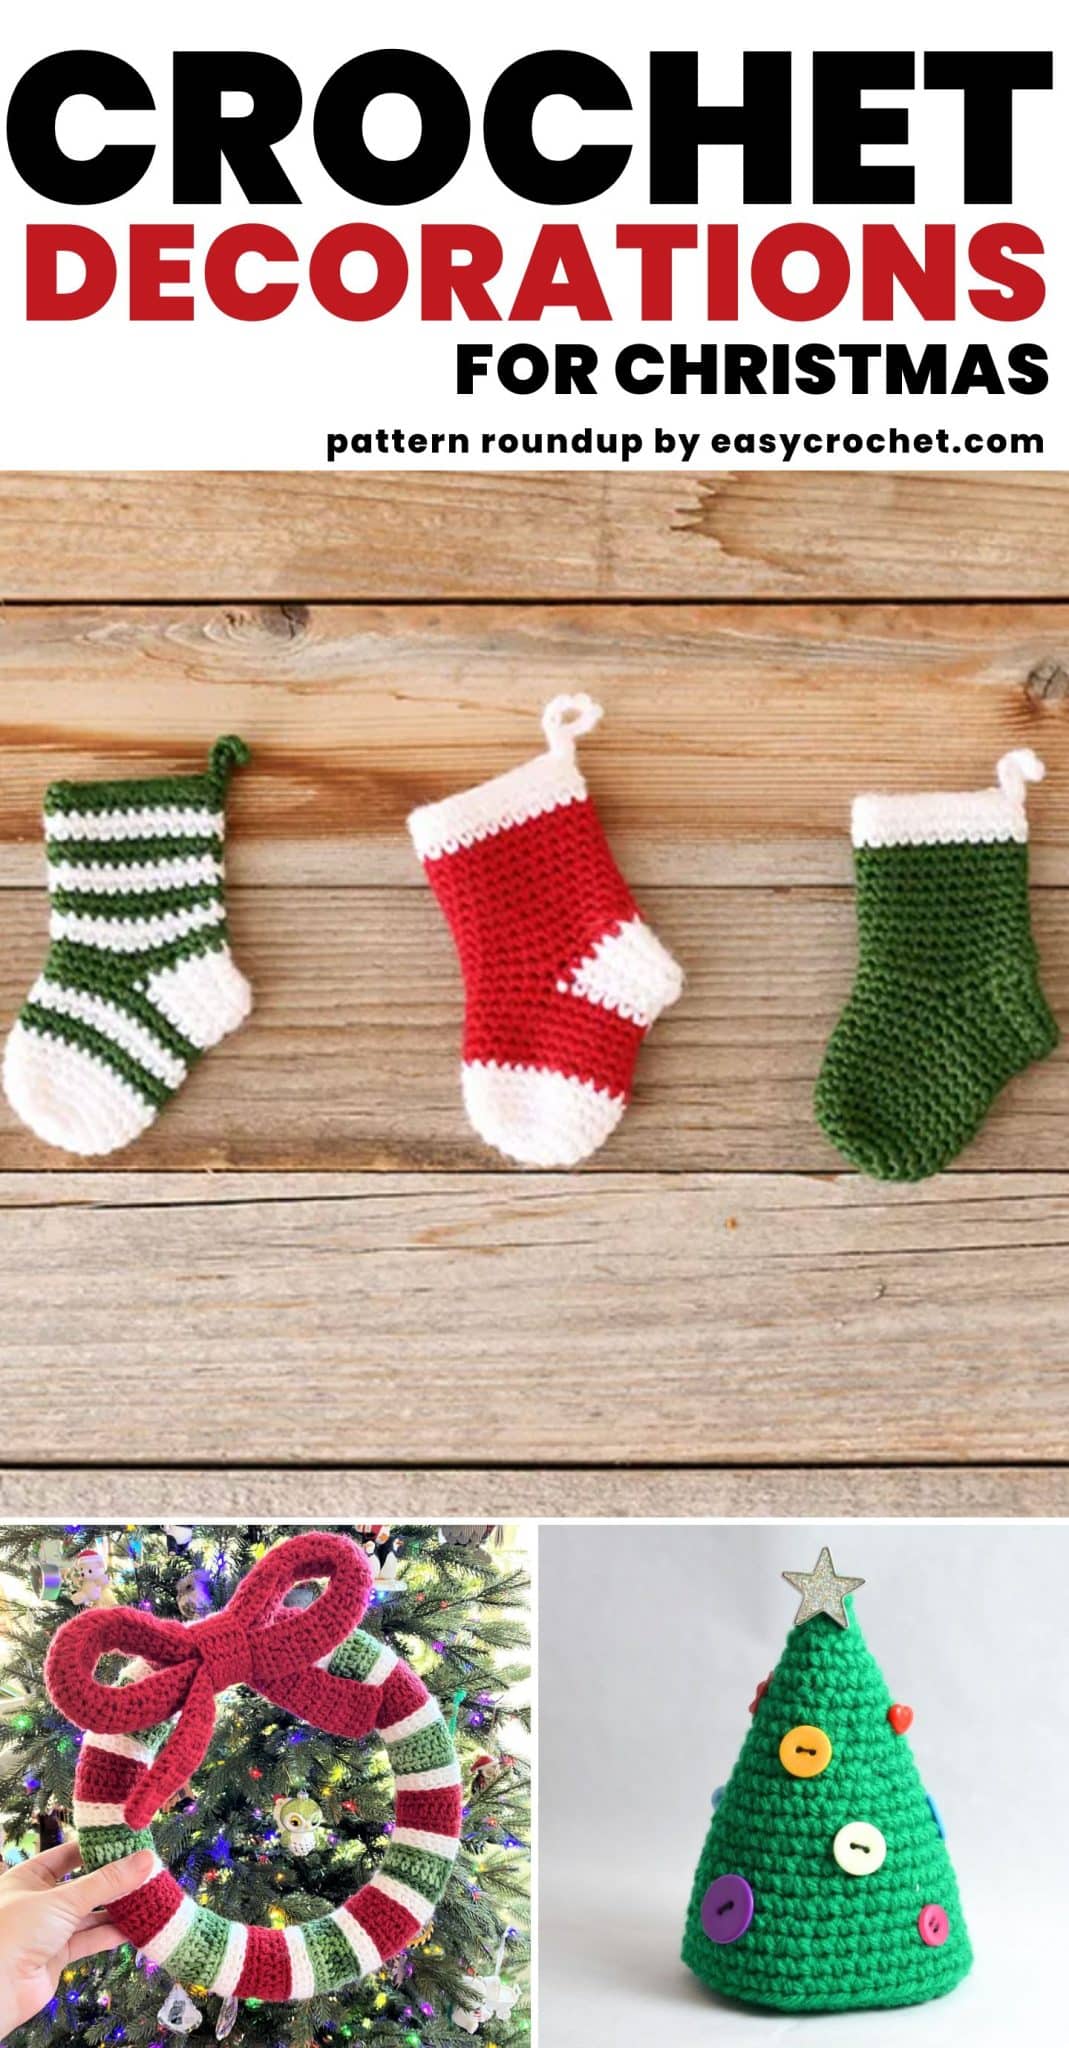 Crochet Decorations for Christmas